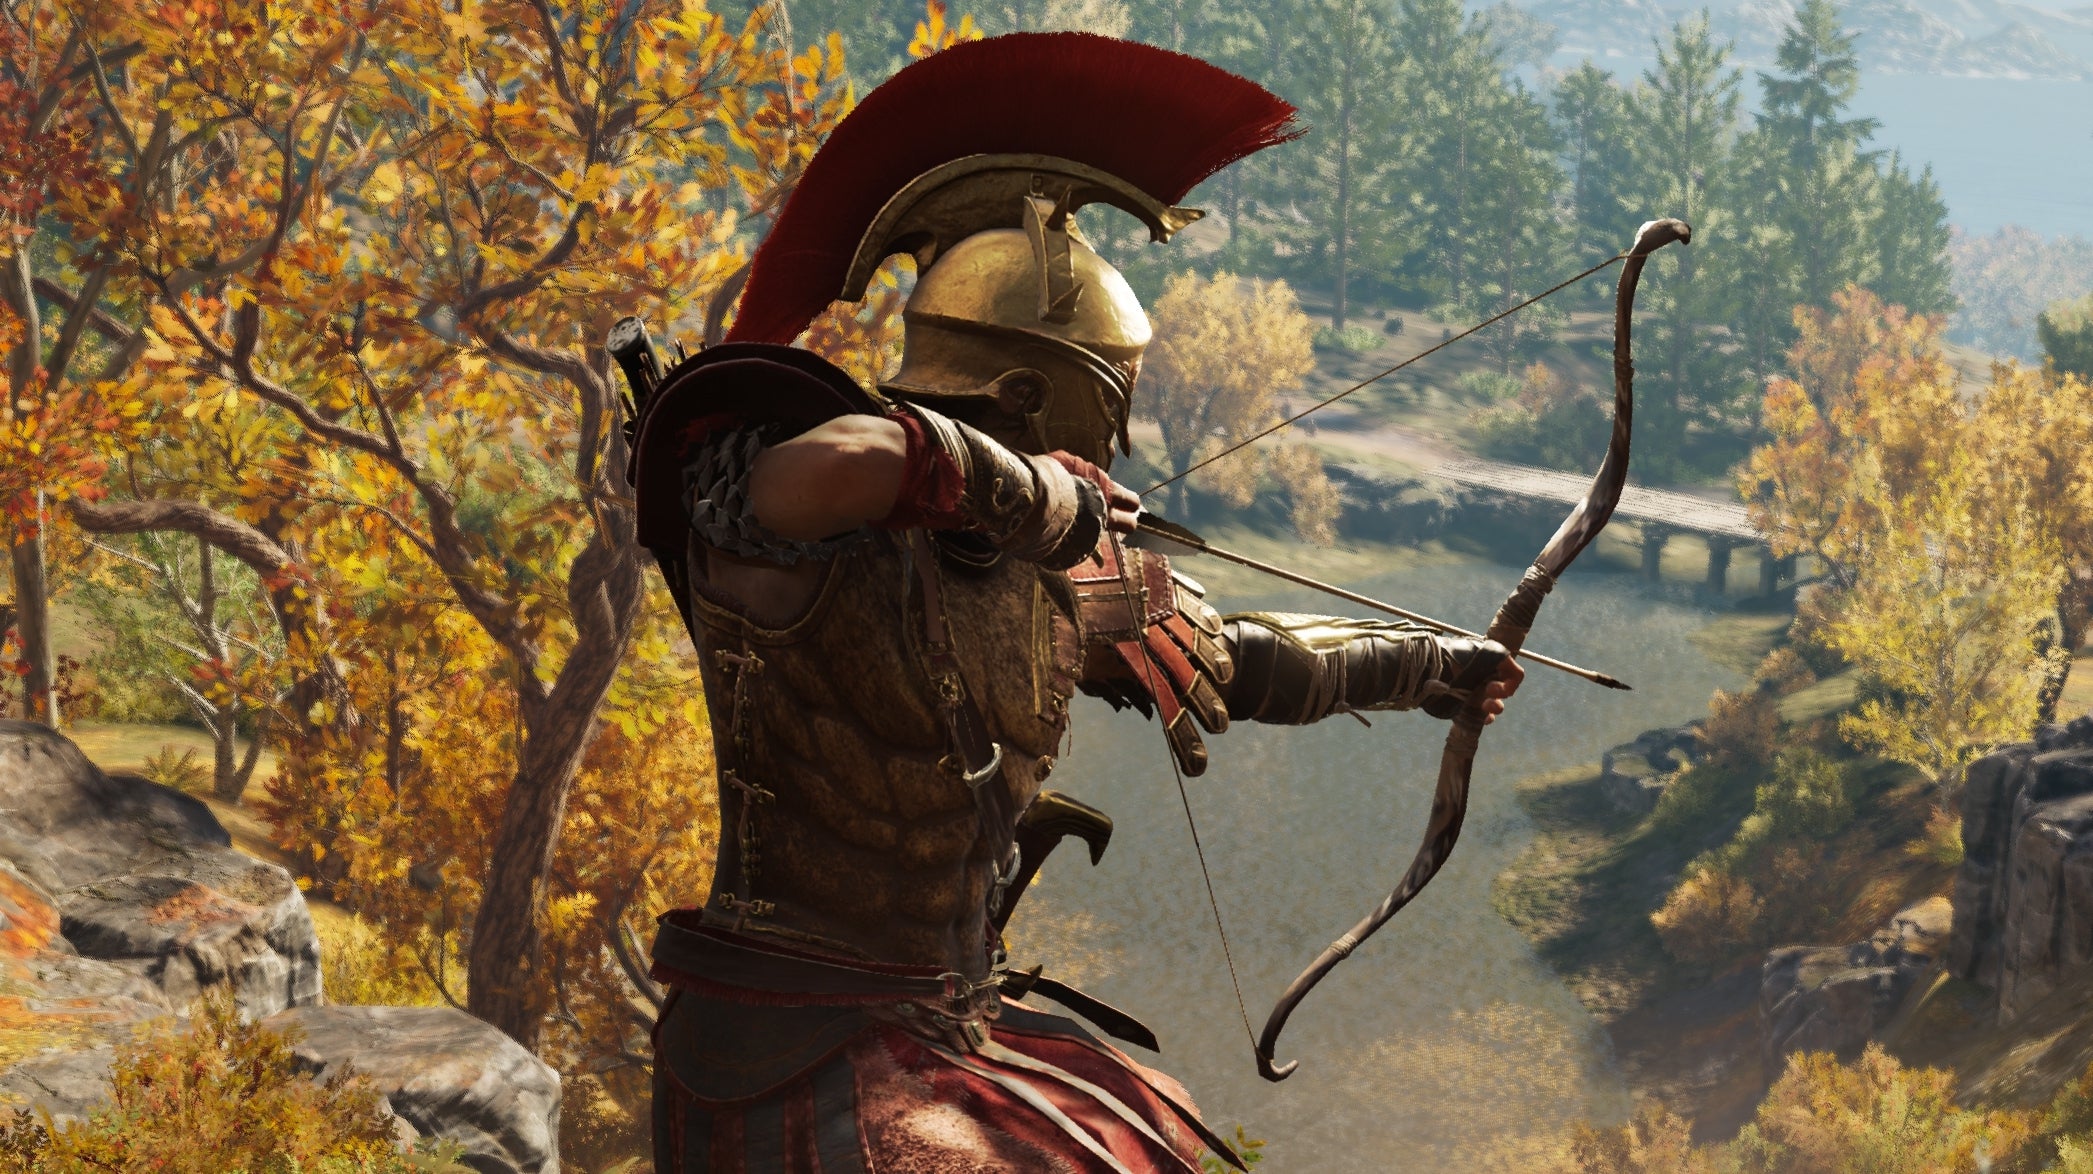 Prosper Serrated Sober Assassin's Creed Odyssey best weapons, armour, engravings, and legendary  armour and weapons listed | Eurogamer.net